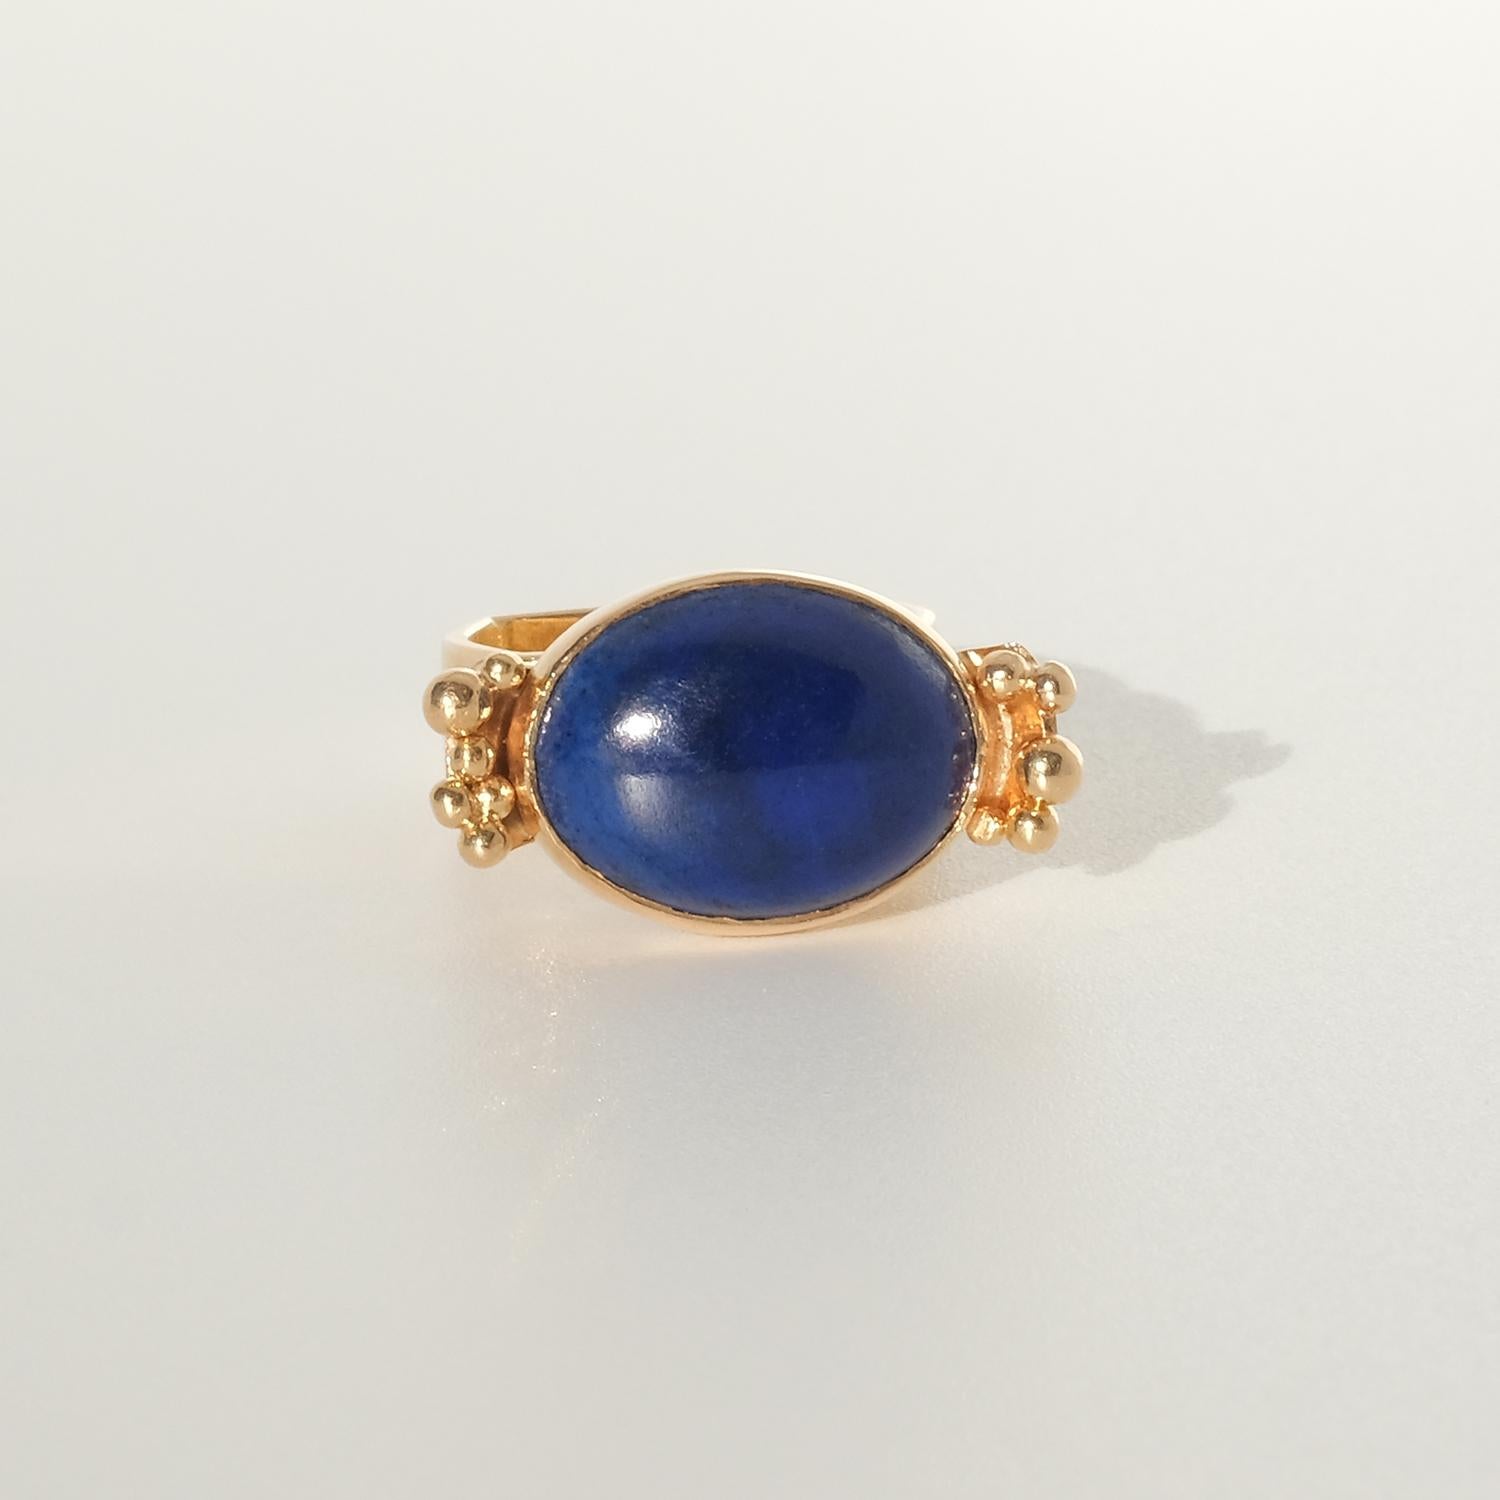 This 18 karat gold ring is adorned with a cabochon-cut grain blue lapis-lazuli stone. The shank of the ring is square shaped and on top of the shoulders of the ring golden bunches of grapes have been placed.

This ring is an eye-catcher which will